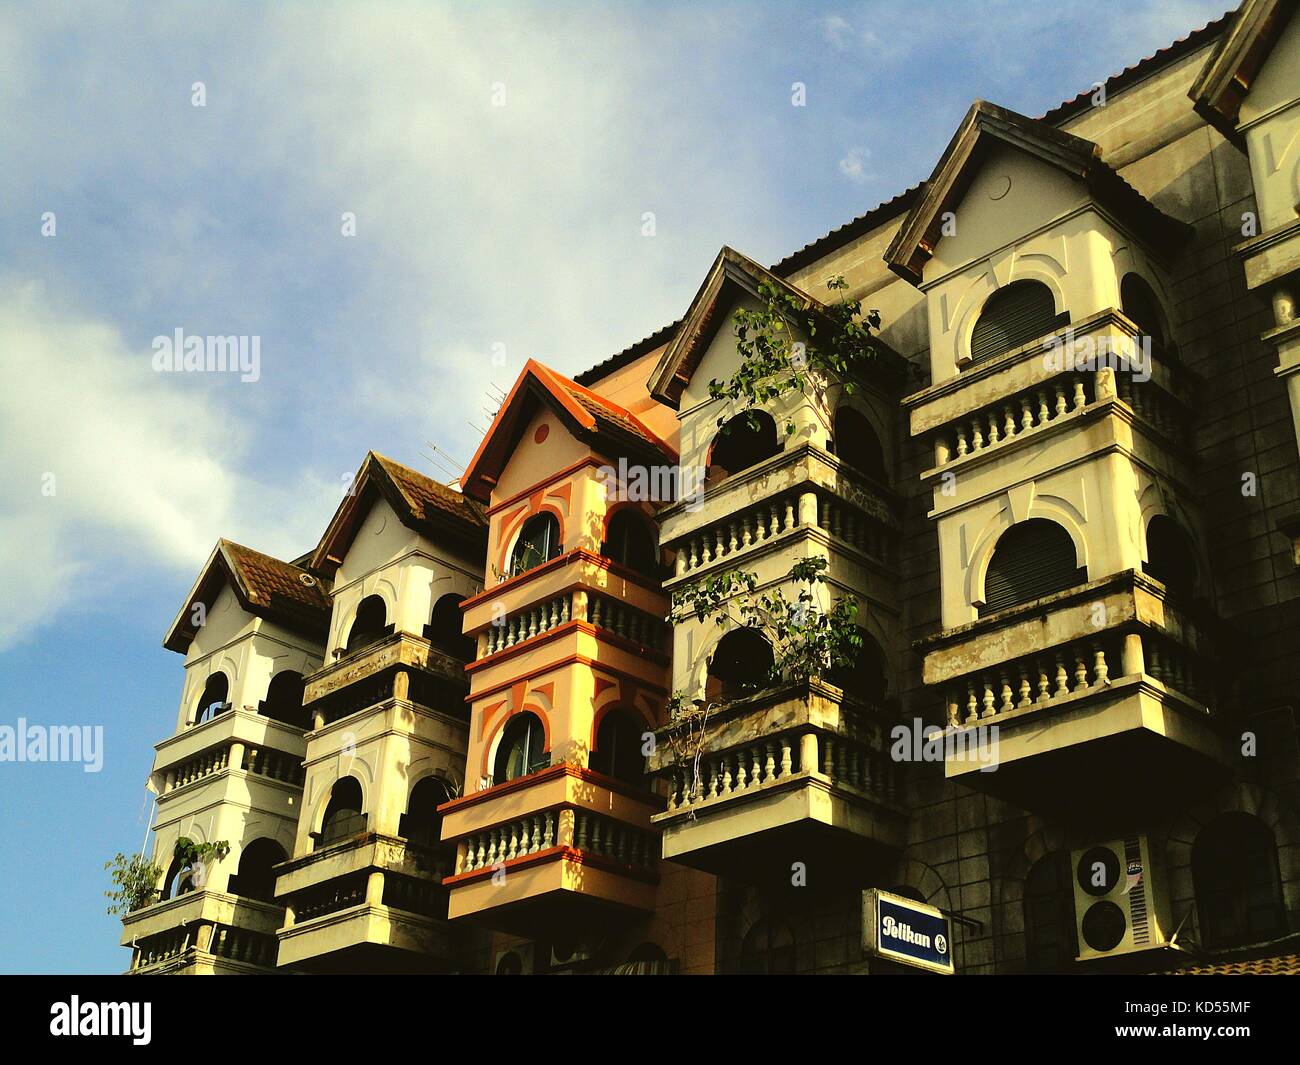 Low angle view of old colonial buildings in Chiang mai, Thailand Stock Photo